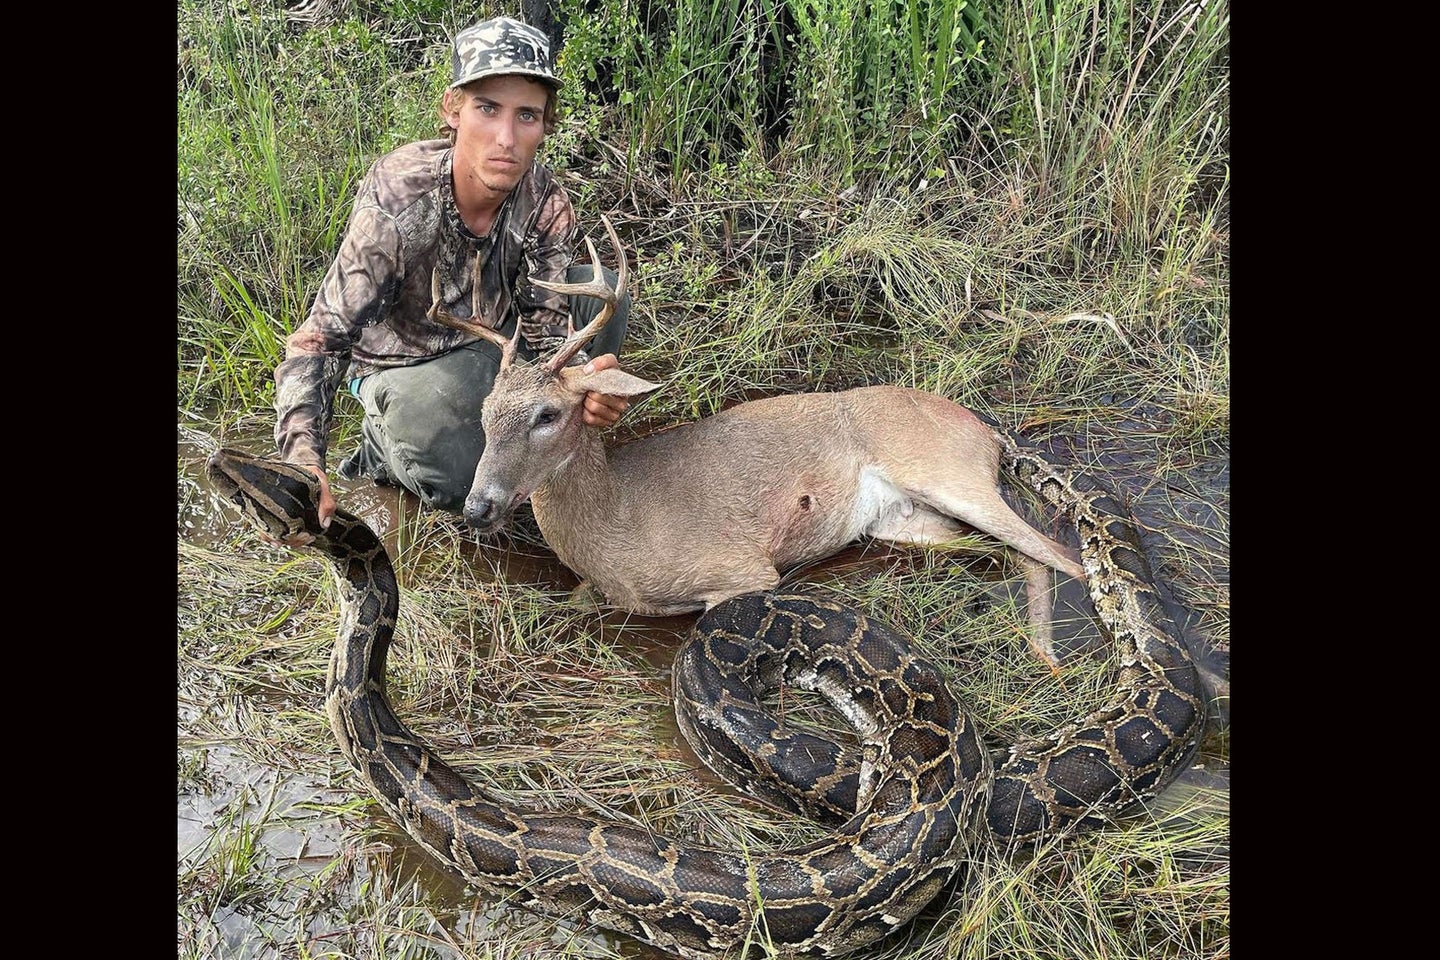 A hunter poses with a buck and a python taken on the same day during a Florida hunt.